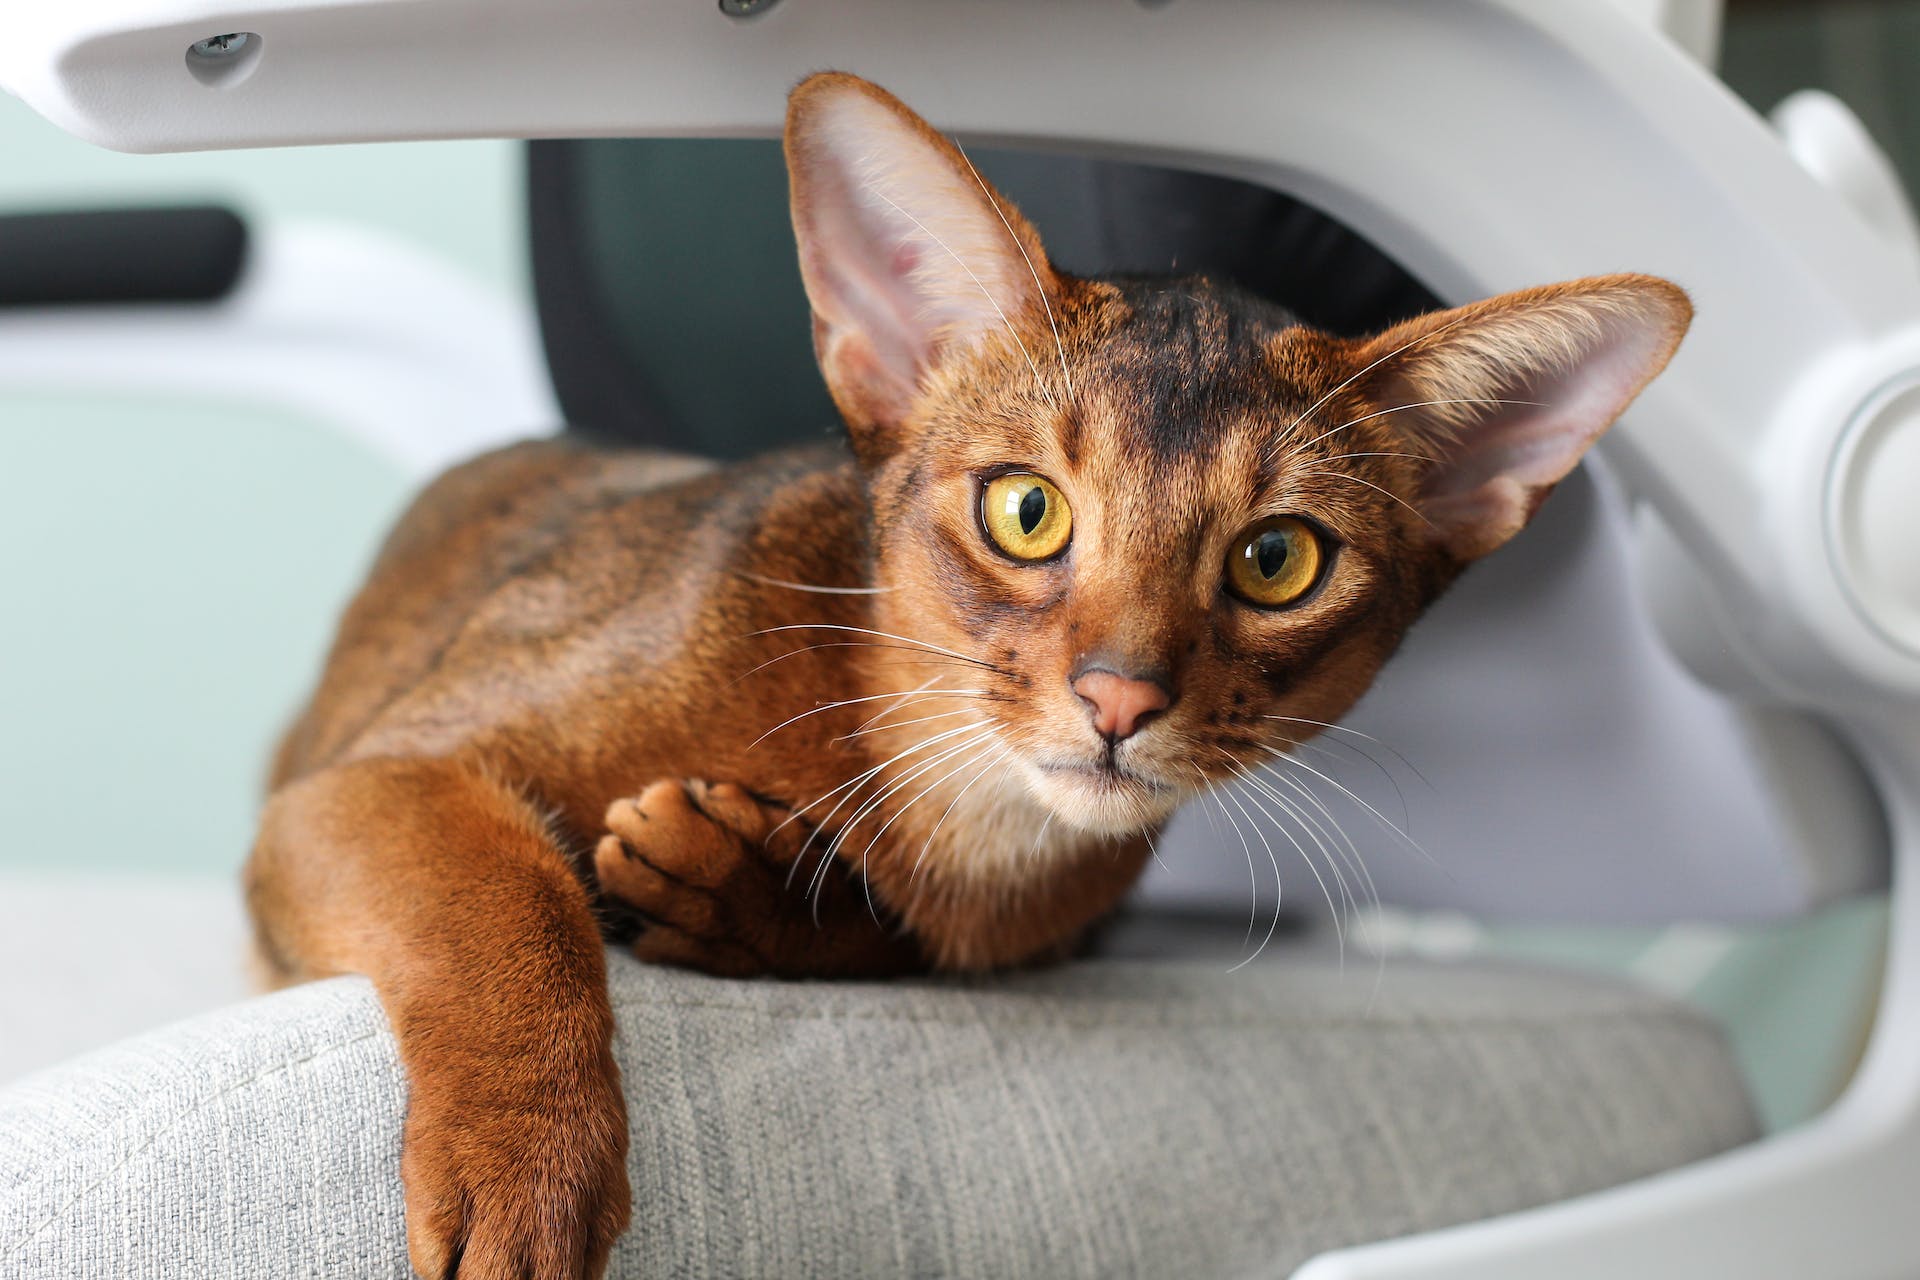 An Abyssinian cat sittting on a white desk chair